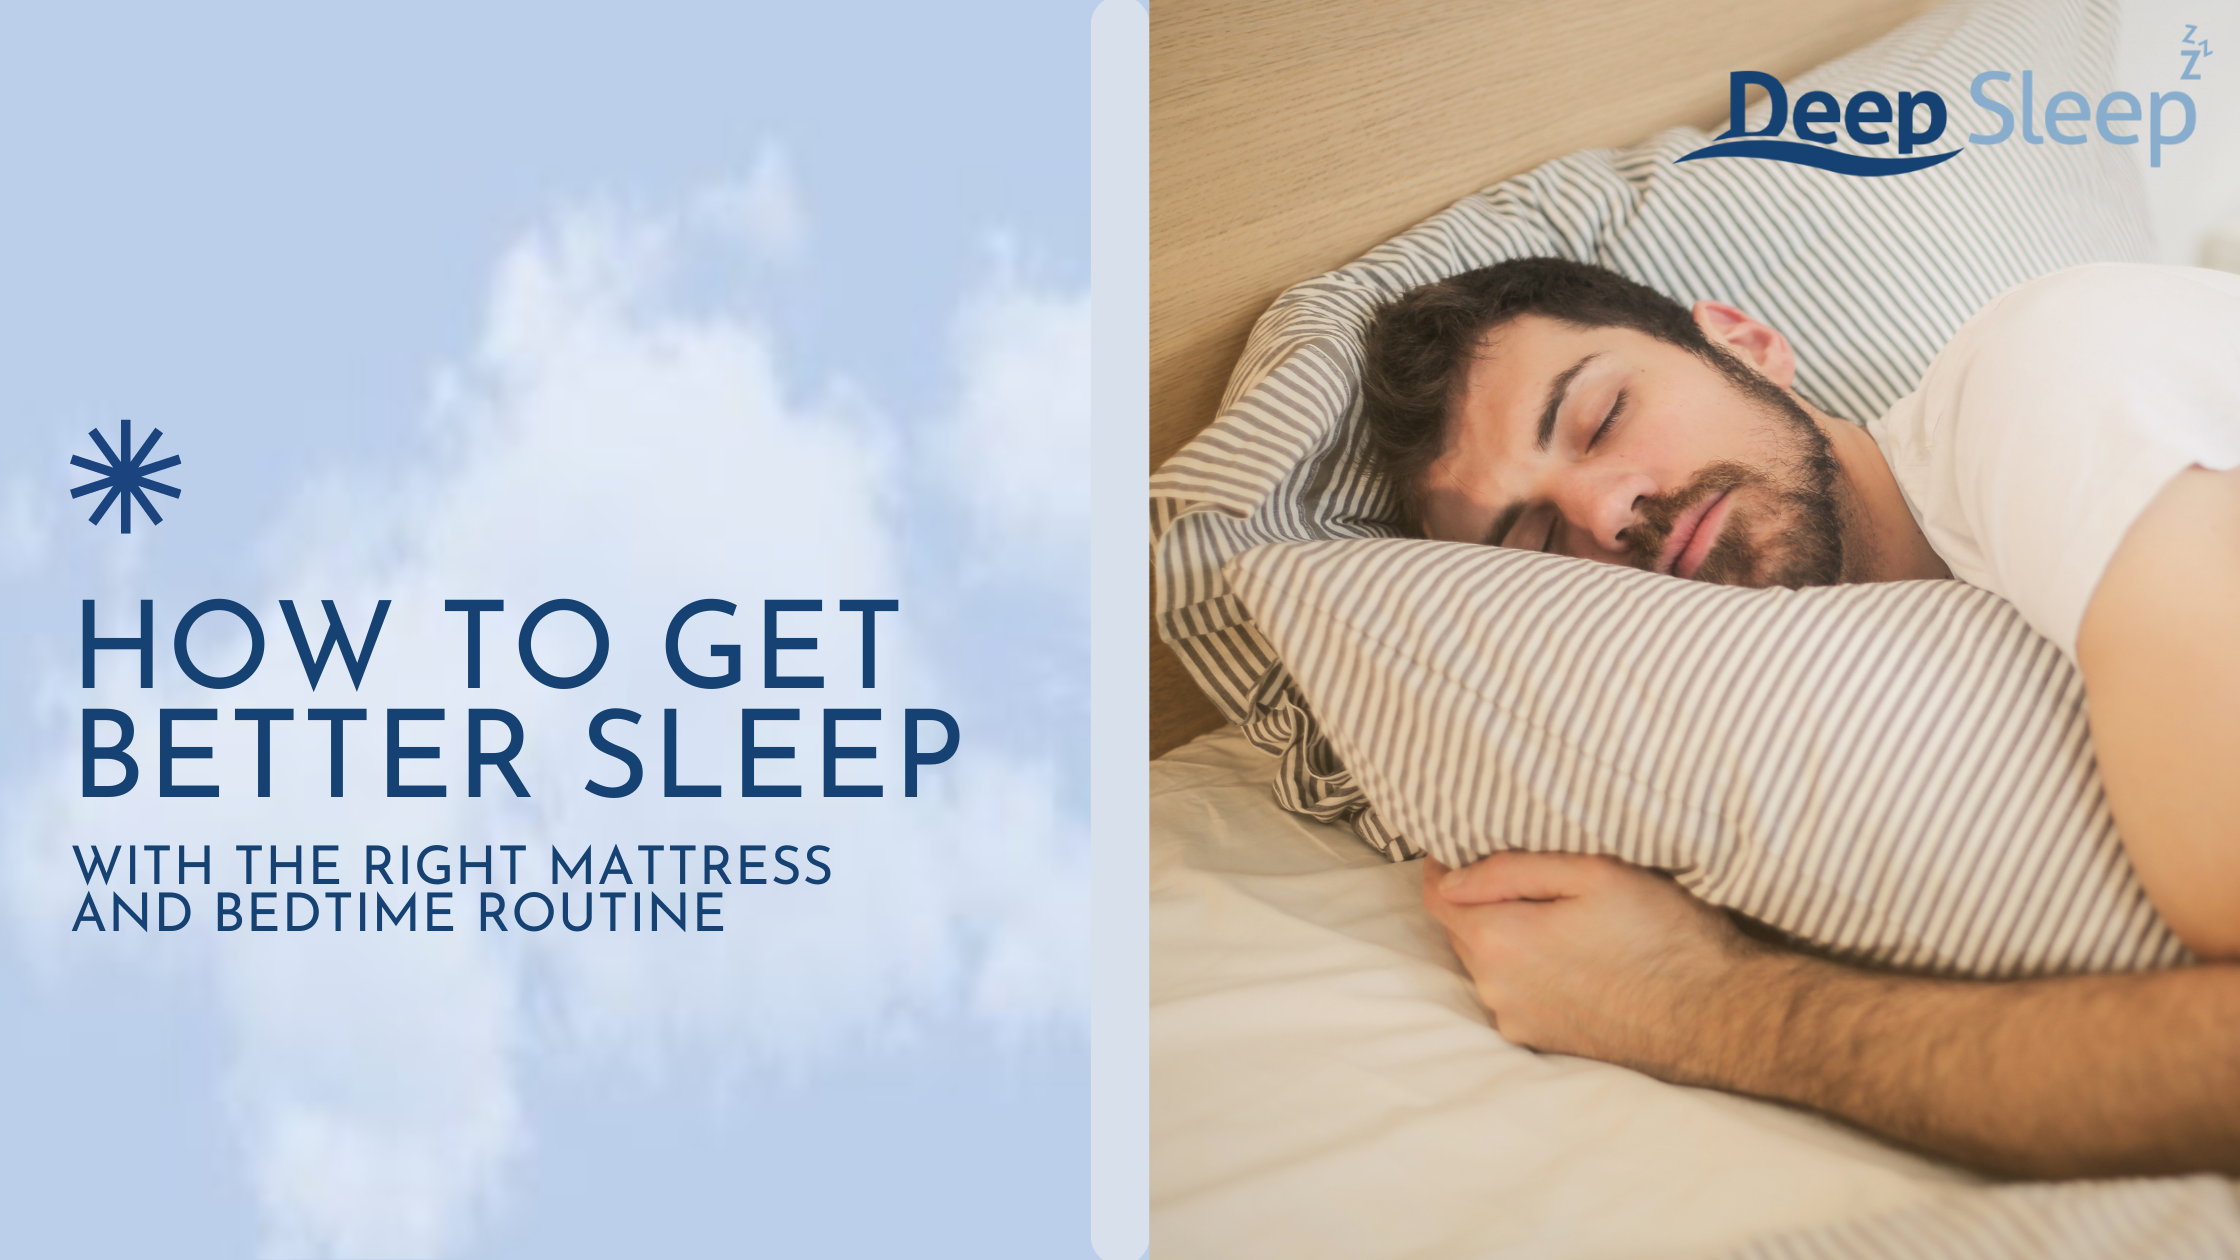 How to Get Better Sleep with the Right Mattress and Bedtime Routine